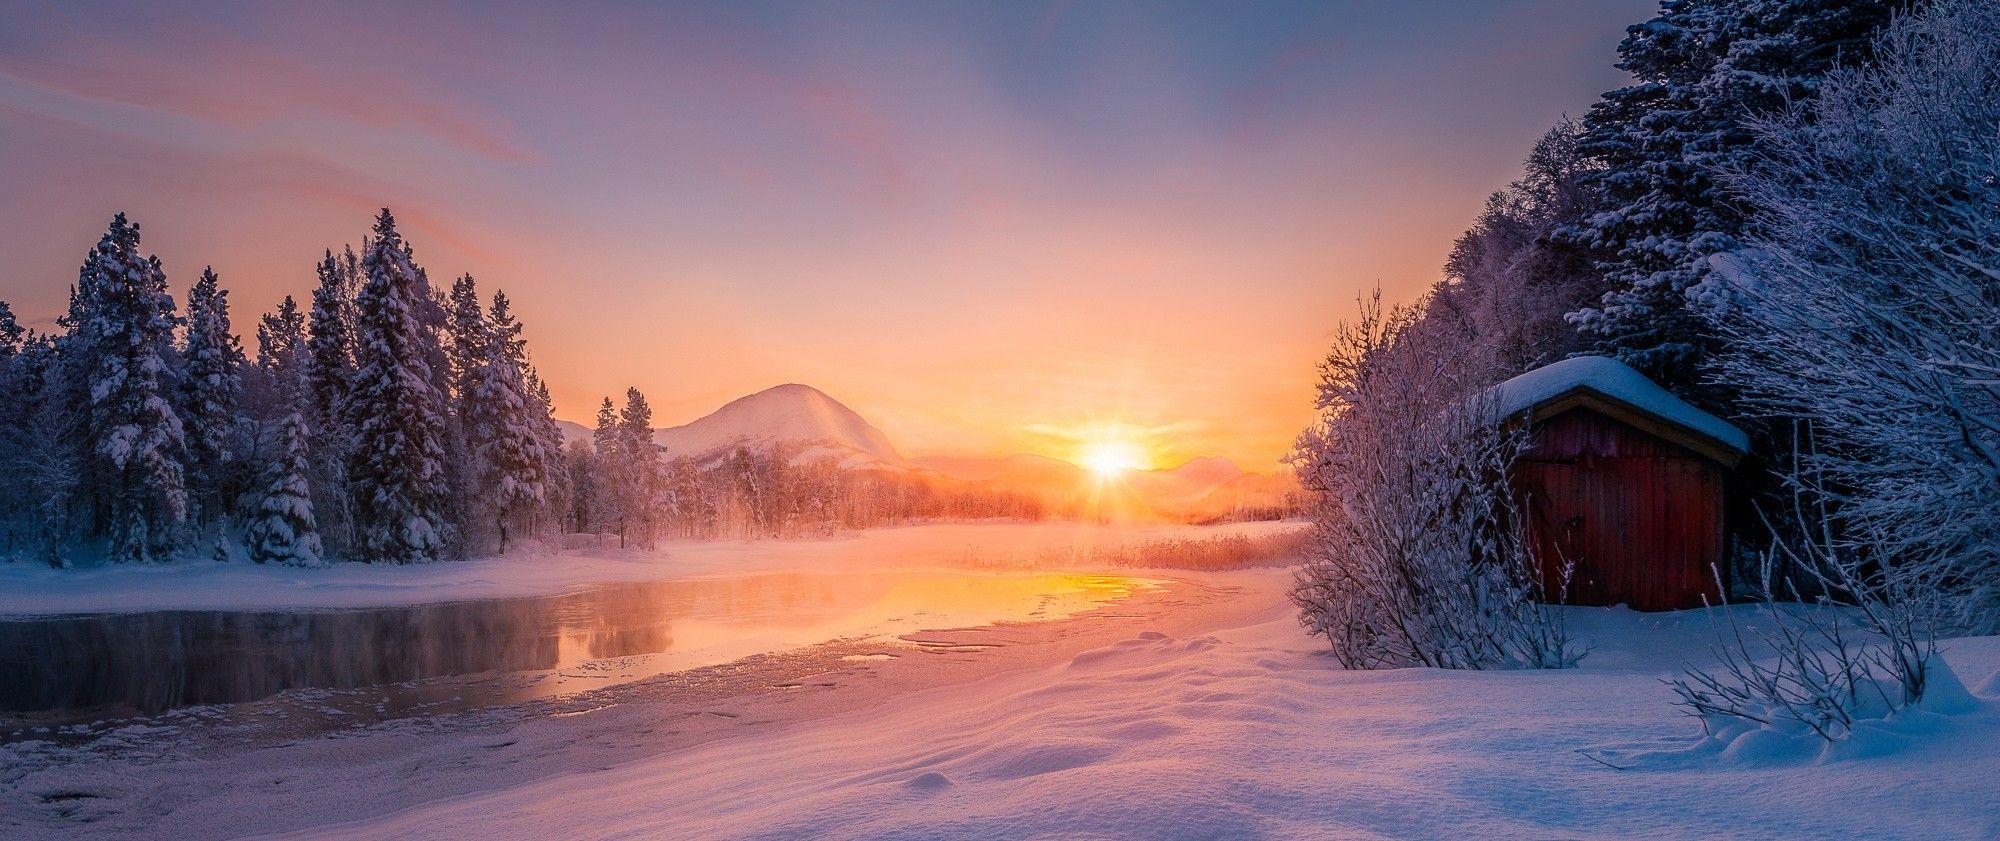 nature, Landscape, Sunrise, Winter, River, Mountain, Snow, Forest, Cabin, Cold, Sun Rays, Norway, Meditation, Calm Wallpaper HD / Desktop and Mobile Background